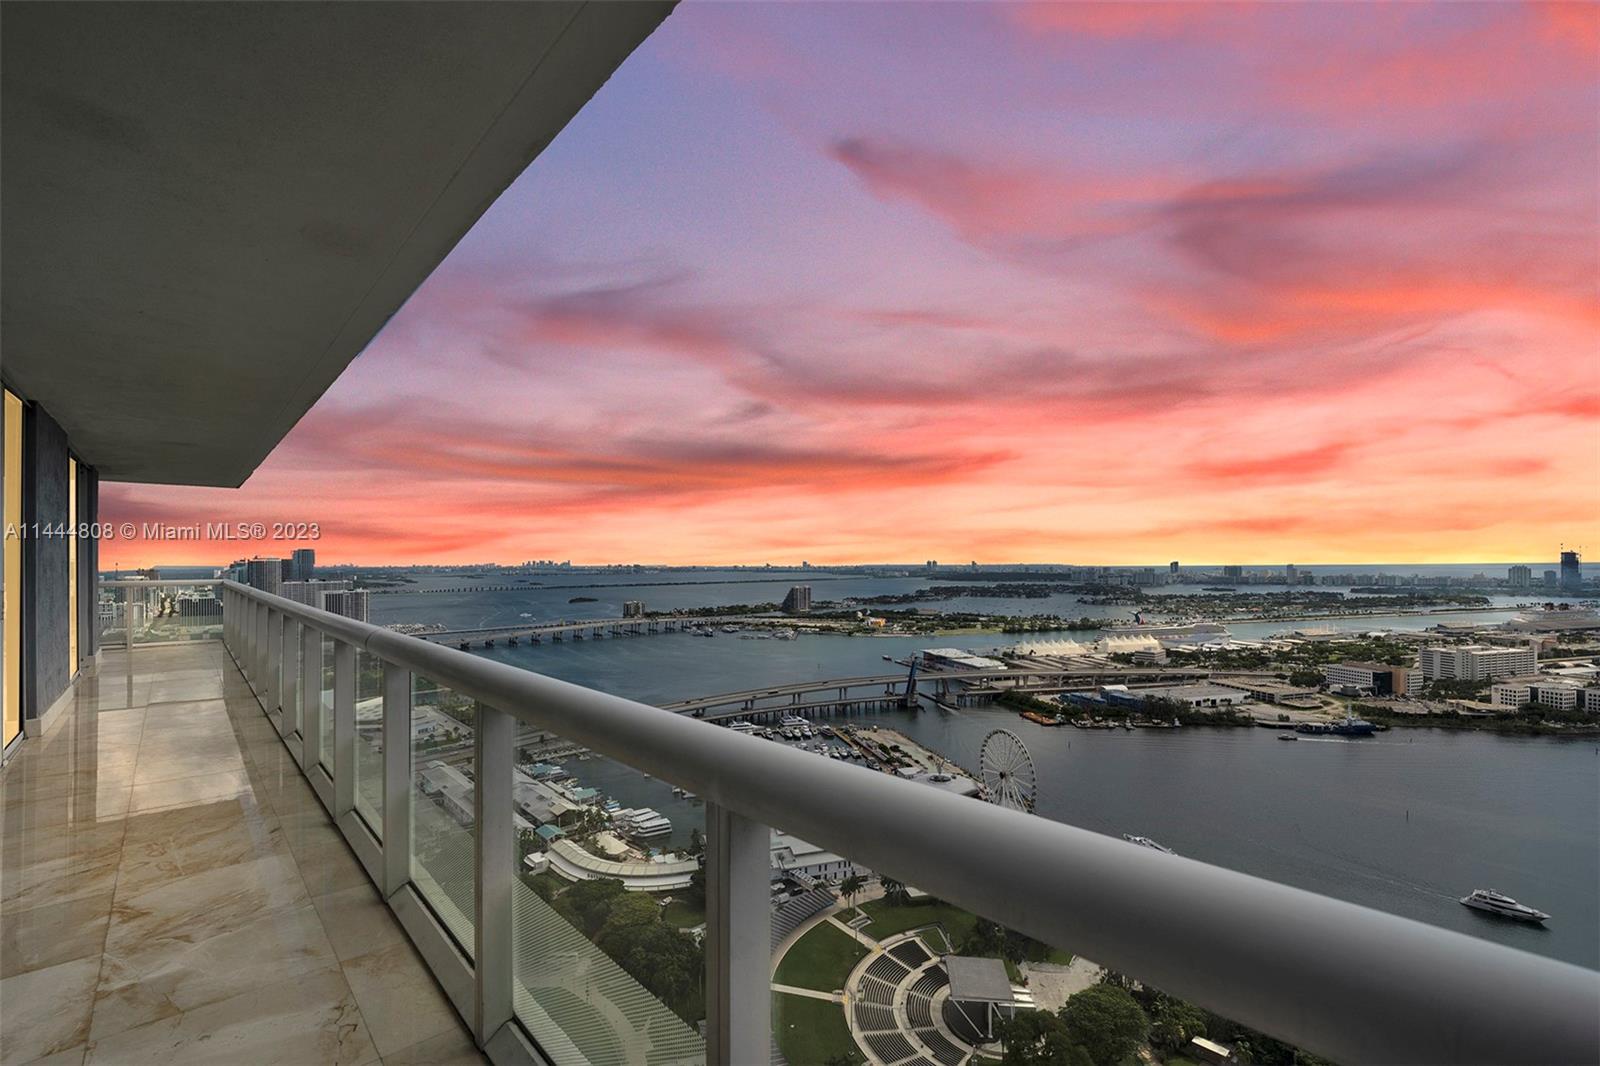 Fantastic 3/2 on a high floor!!  Beautiful corner unit with wrap around balcony and expansive views of bay, ocean, South Beach, and skyline. Unique opportunity to combine with 5201. This unit offers 1789 sq ft with plenty of room for comfortable living. Marble floors add luxury and elegance to the interior. Includes one parking space. Close to Kaseya Arena, Arscht Center, Whole Foods, and Brickell City Centre.  Easy access to Metromover, I95 and South Beach. Incredible amenities include spa, pool, gyms and social areas.  Amazing opportunity to combine with 5201 for over 3,000 sq ft of luxury. This condo/building offers modern conveniences, stunning views, and central location, making it a highly desirable place to live and enjoy the vibrant urban lifestyle of Downtown Miami.  WILL NOT LAST